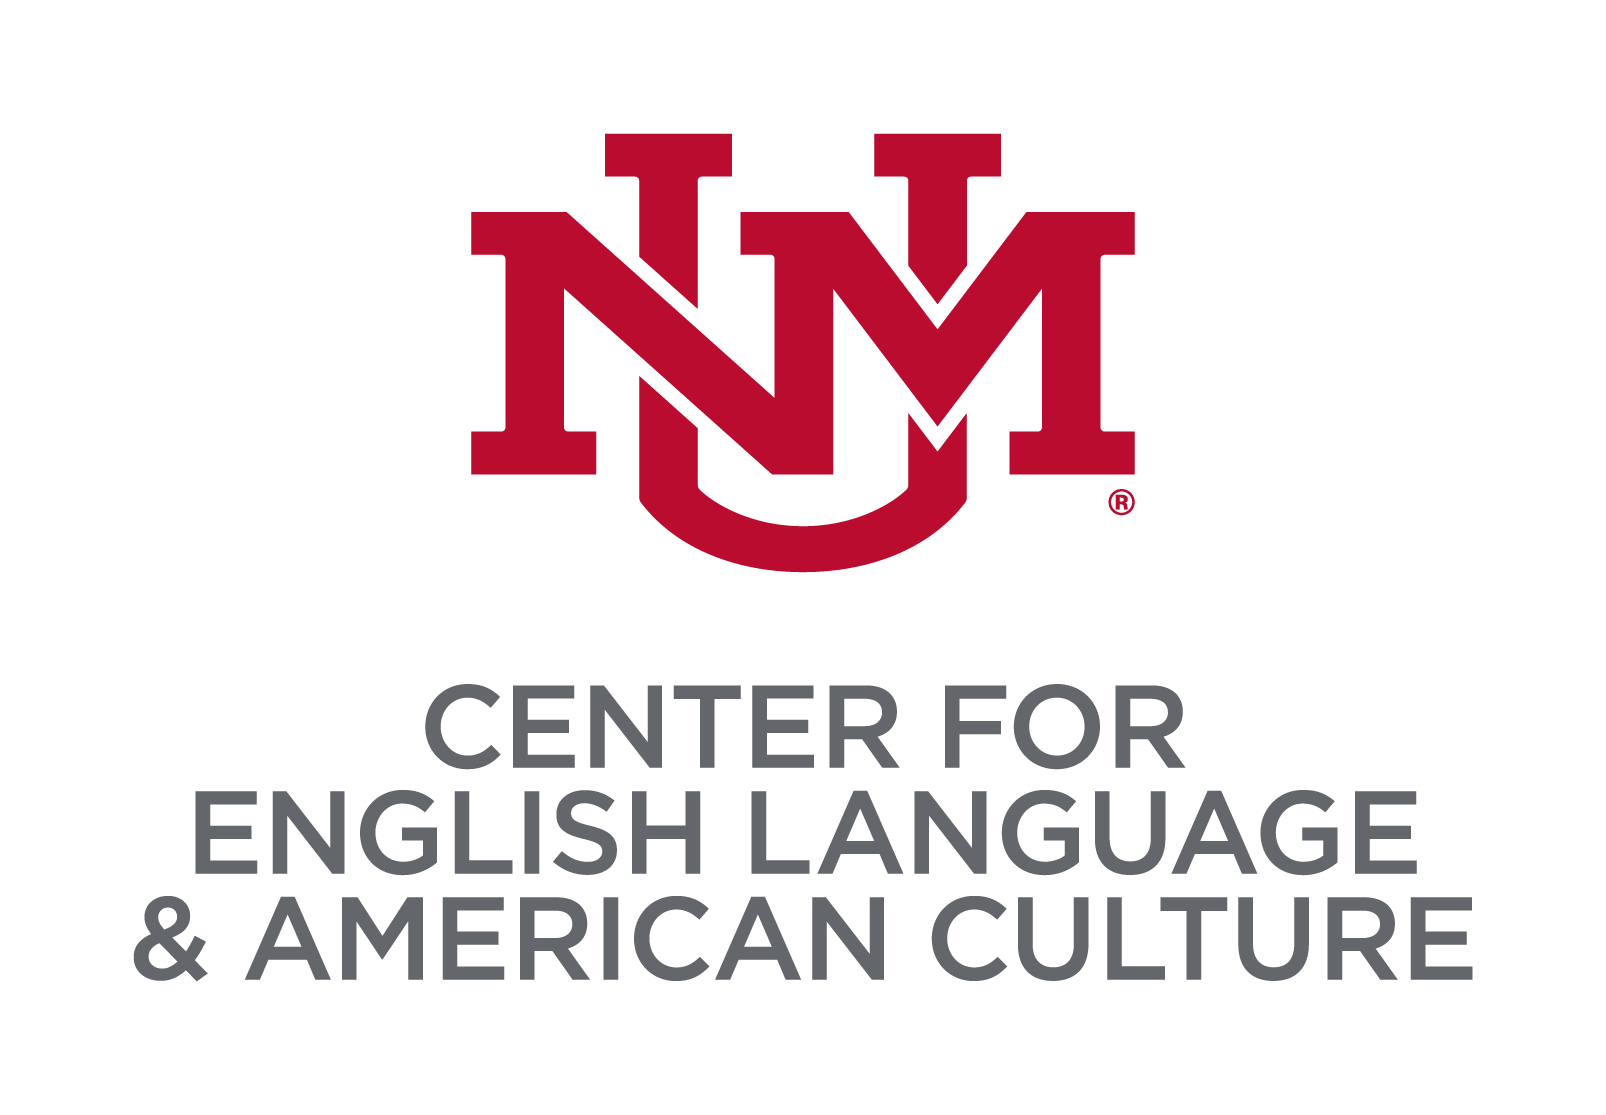 The UNM Center for English Language & American Culture